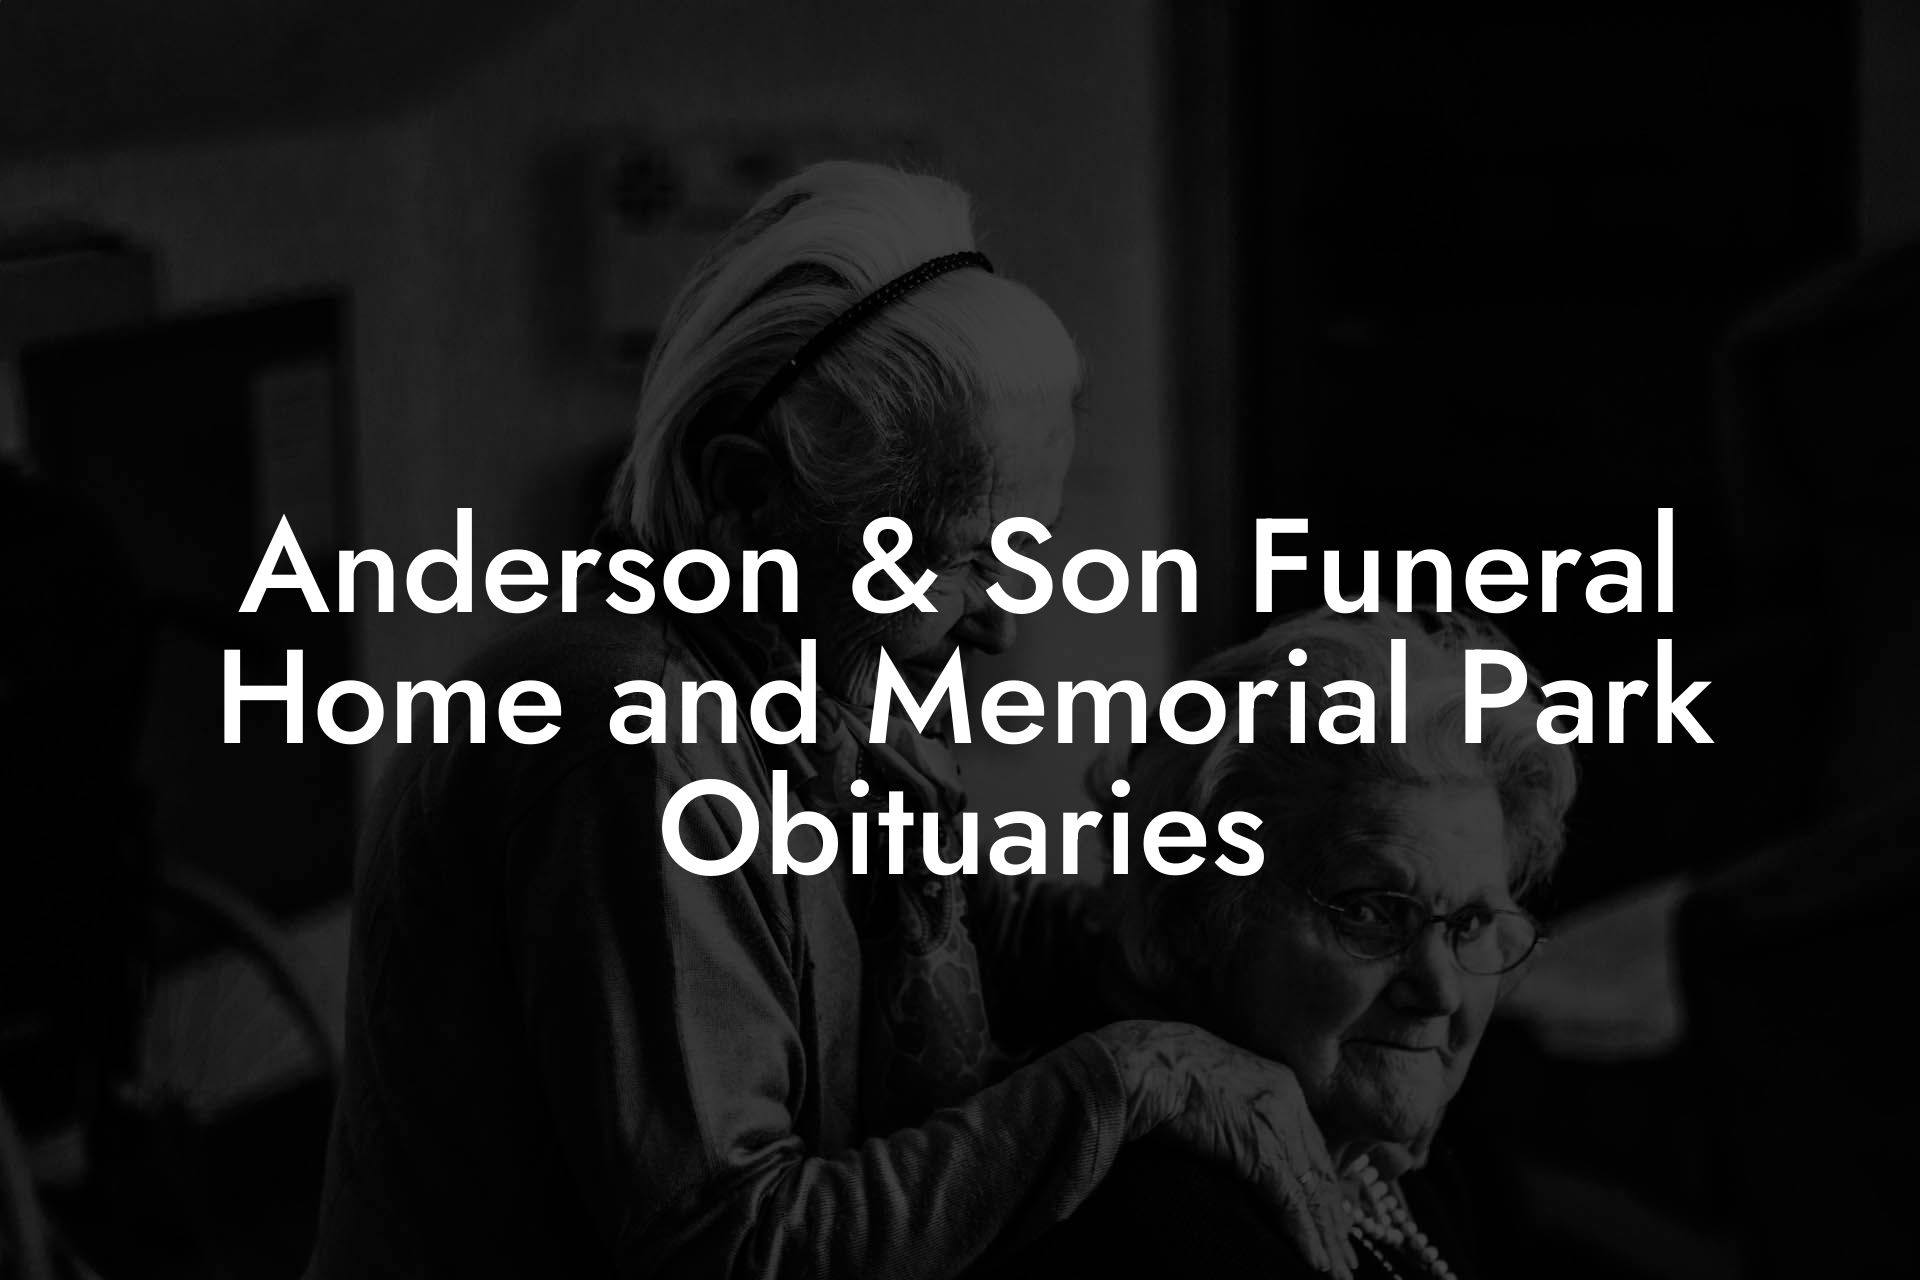 Anderson & Son Funeral Home and Memorial Park Obituaries